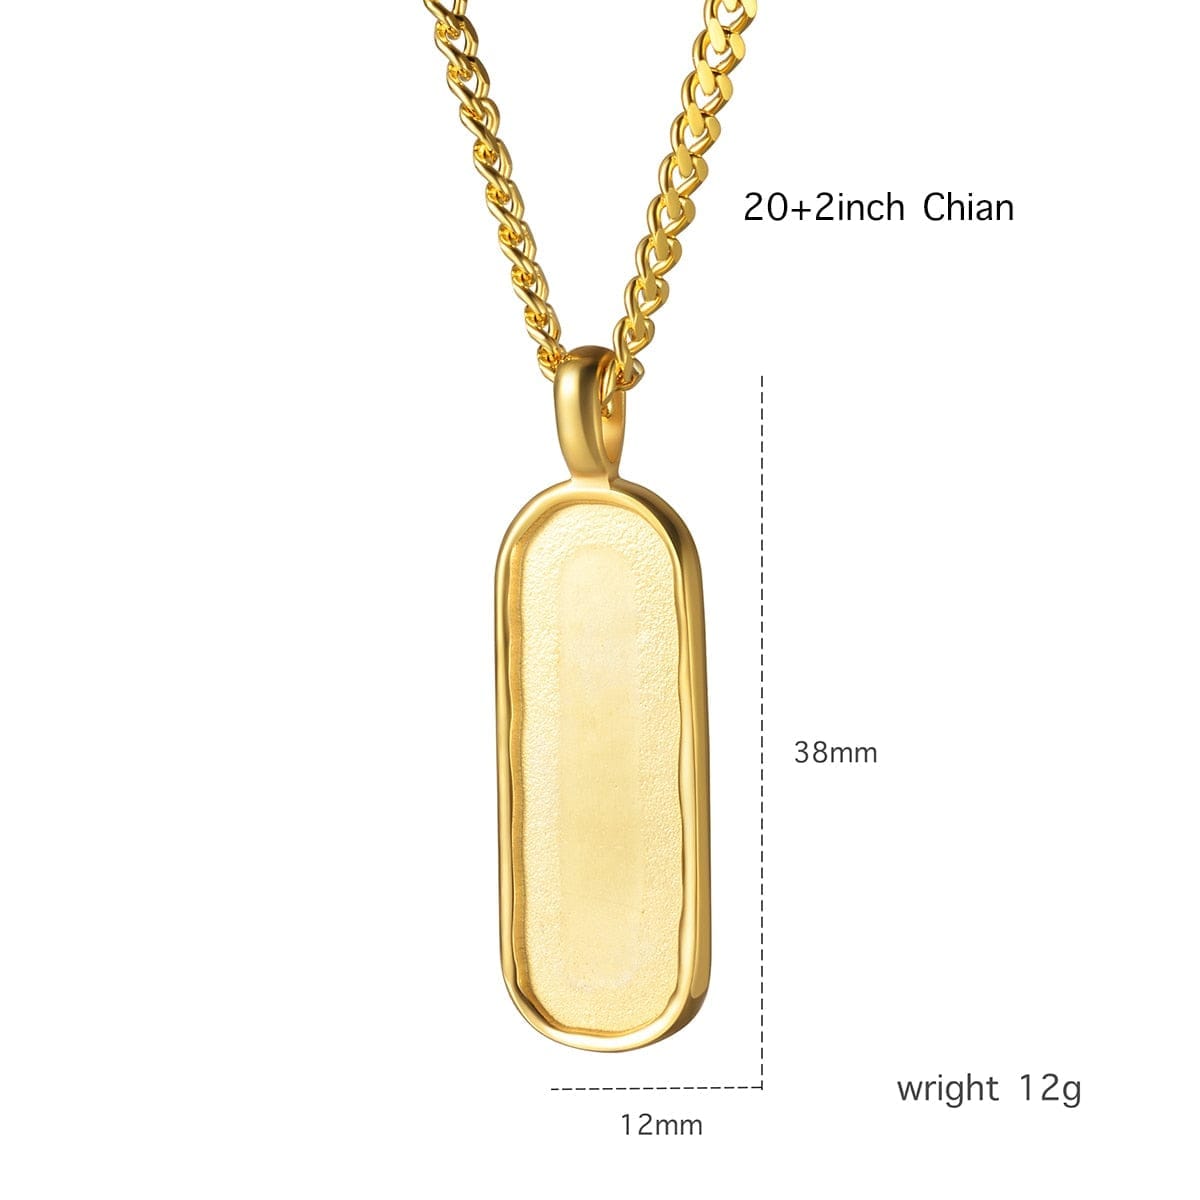 Premium Custom Engraved Bar Necklace Pendant With Rounded Edges